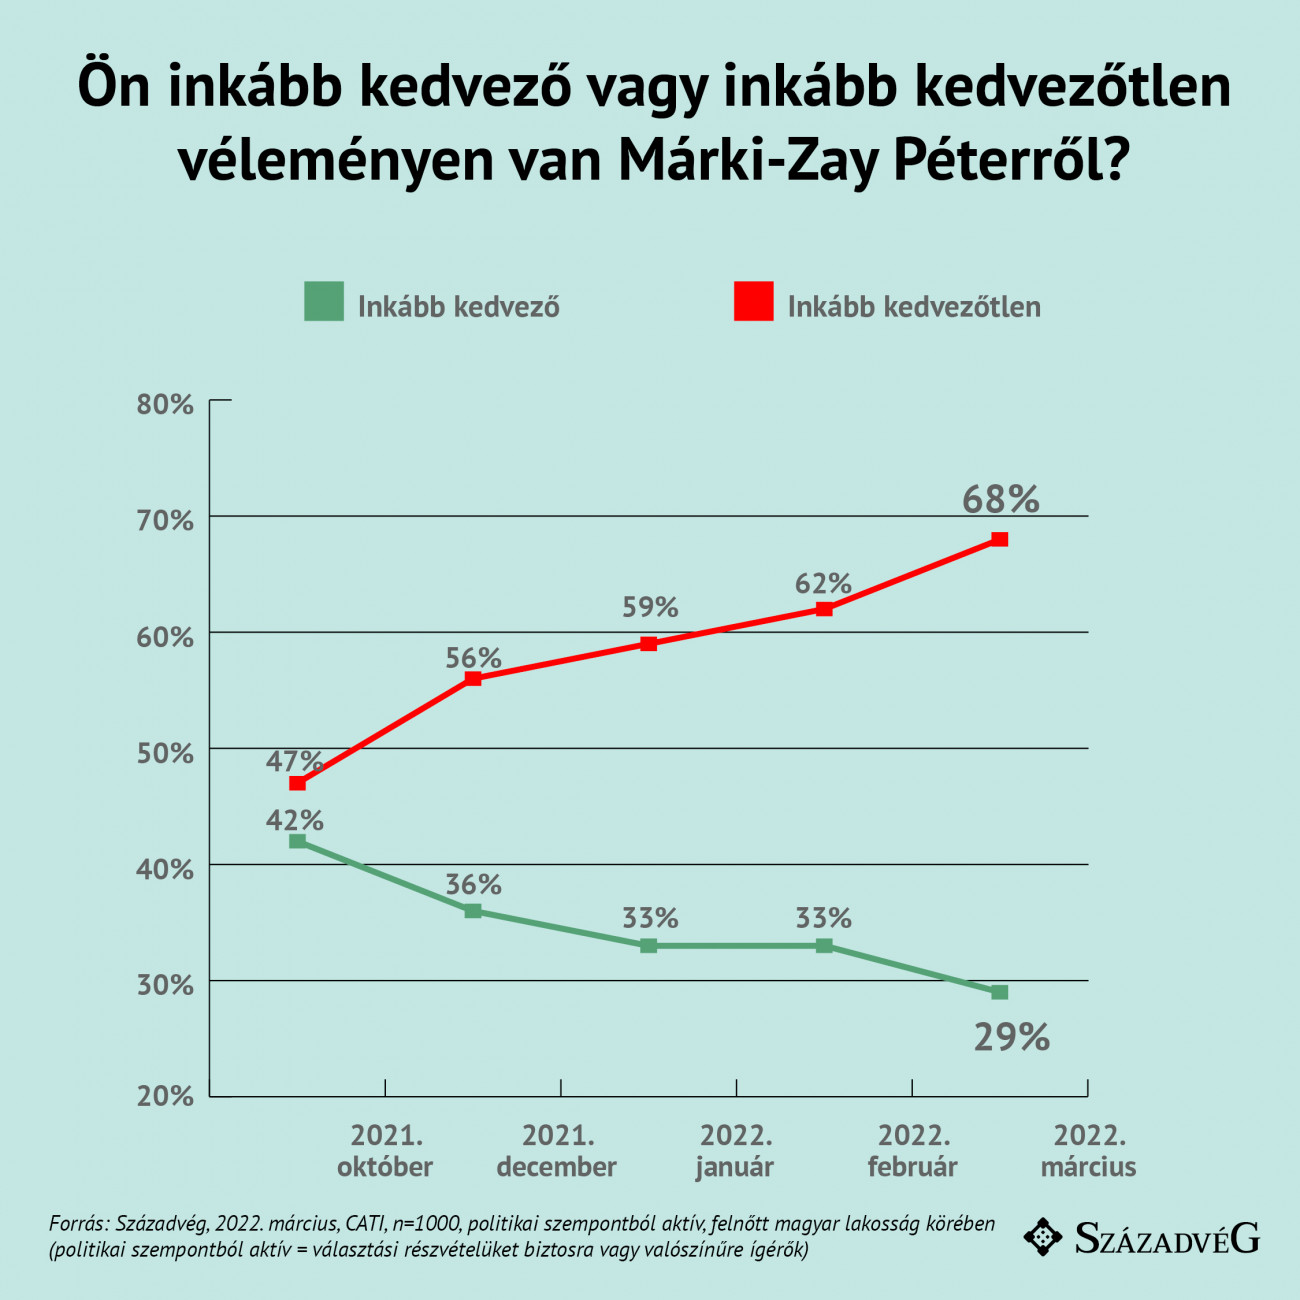 New Survey Says Márki-Zay's Popularity Continues to Fall Among “Politically Active” Hungarians